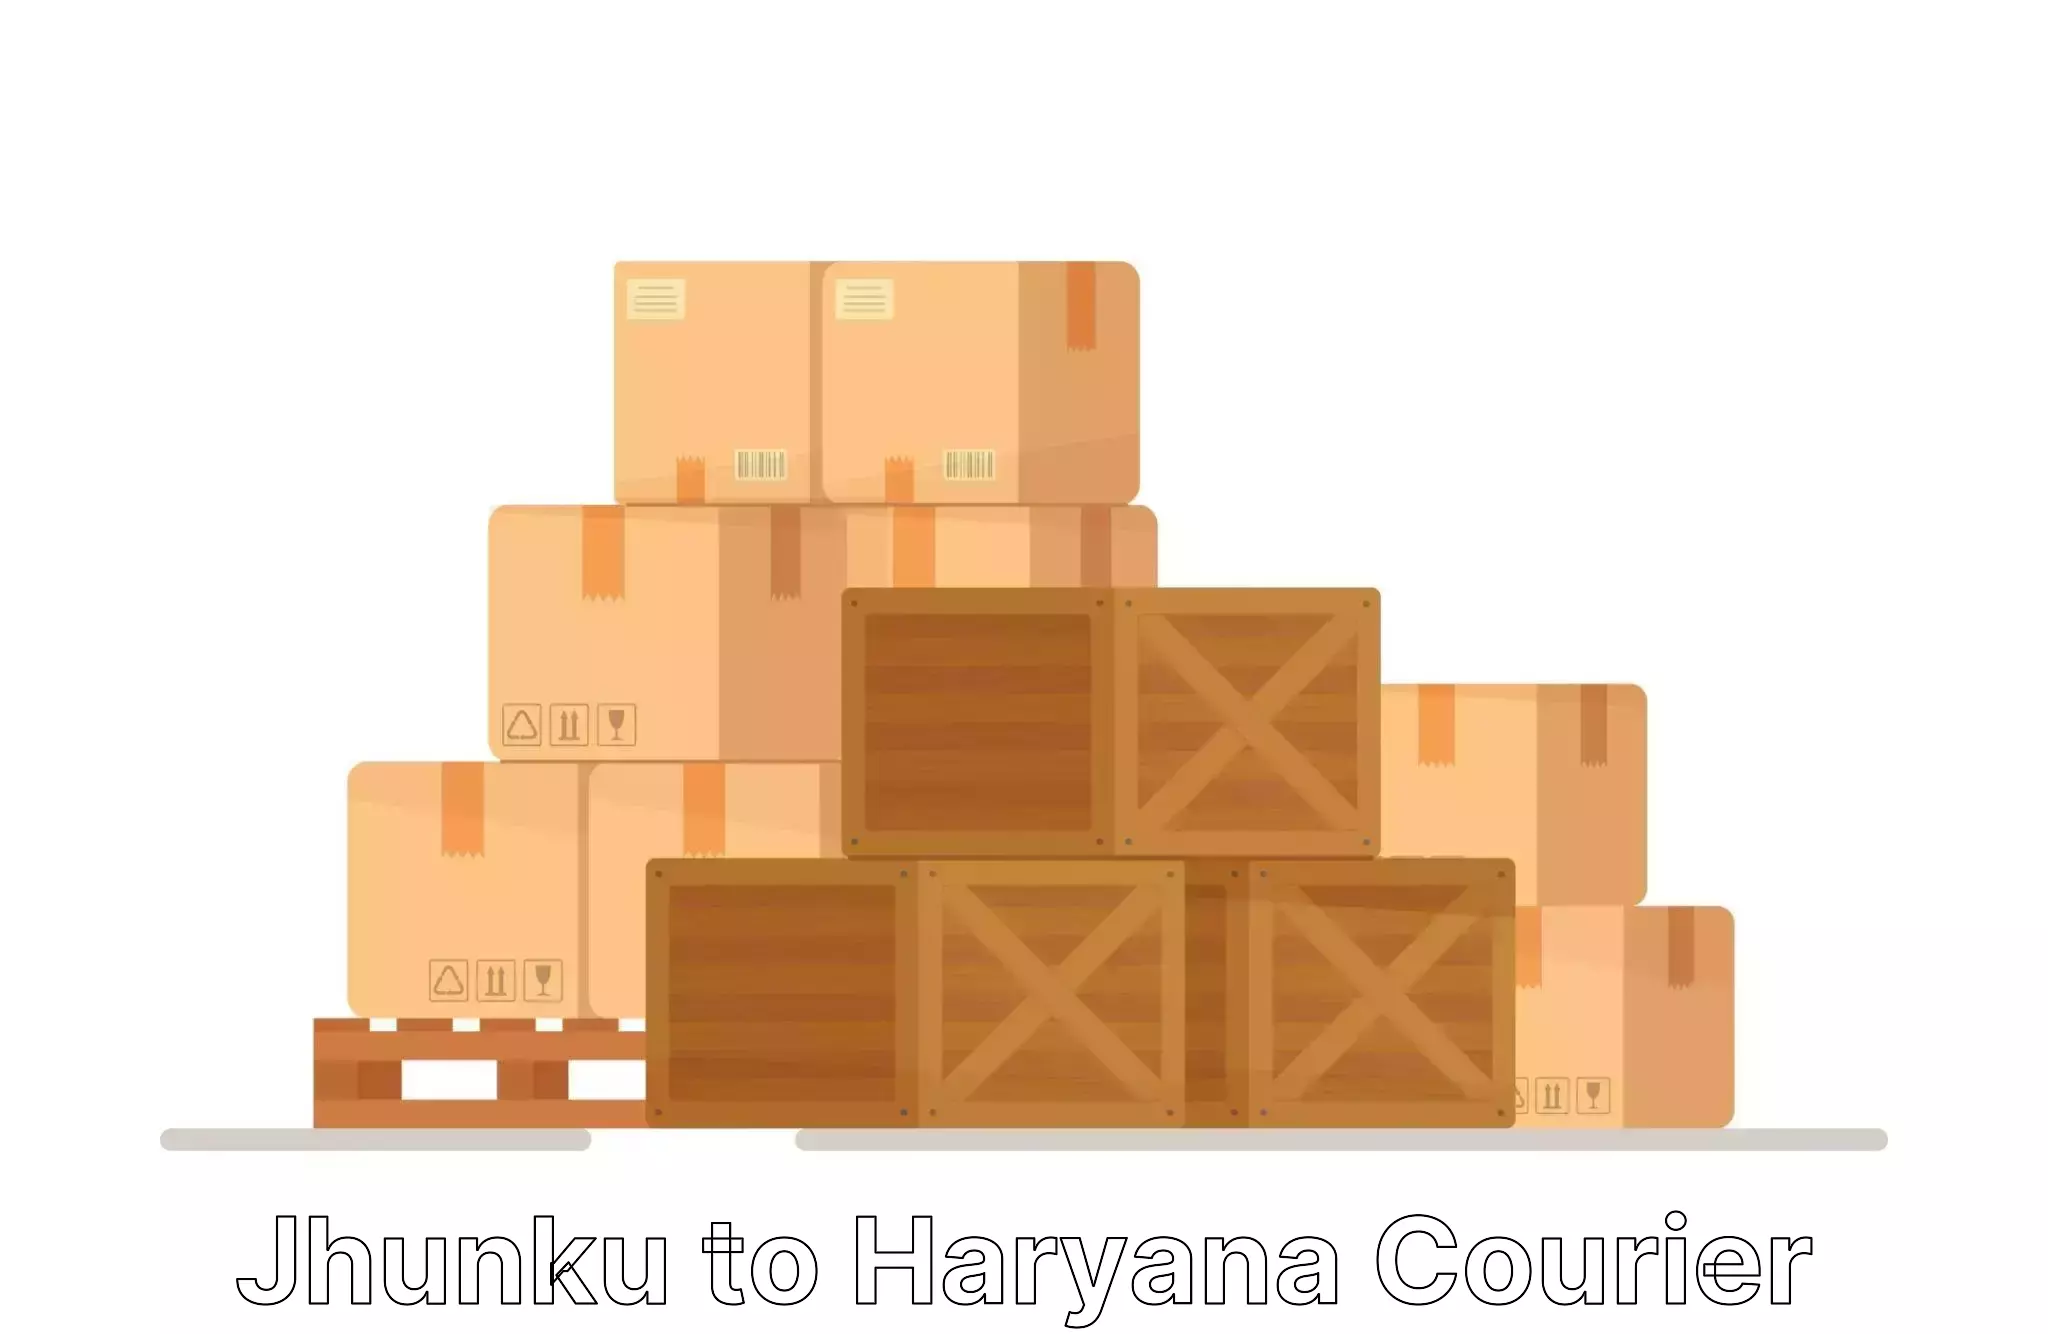 Personalized relocation plans Jhunku to Haryana